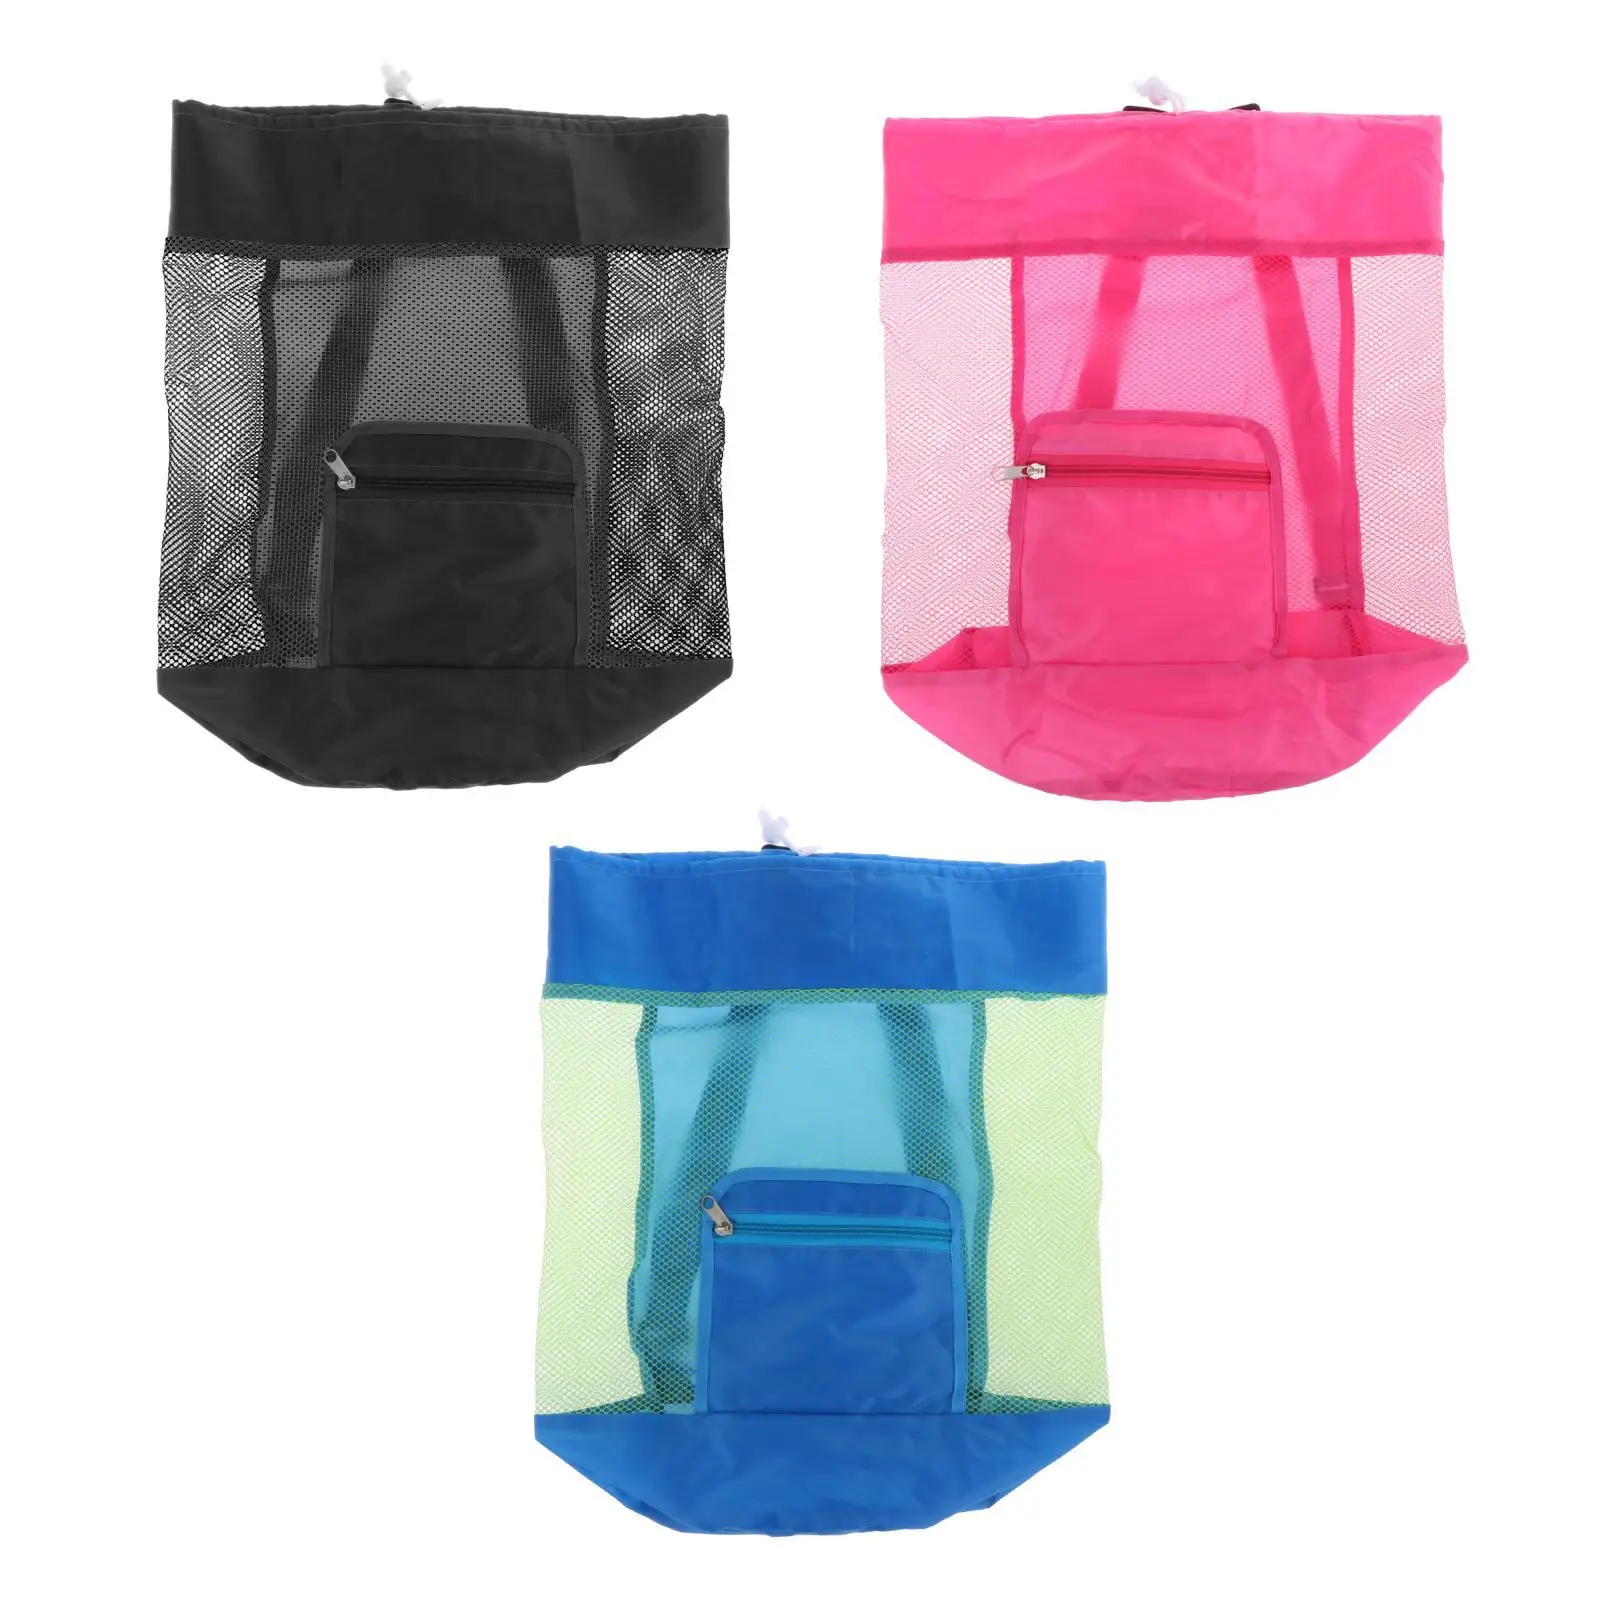 Beach Mesh Bag Mesh Net Tote Sea Shell Bags Beach Storage Bag Beach Sand Toy for Outing Swimming Picnic Household Accessories